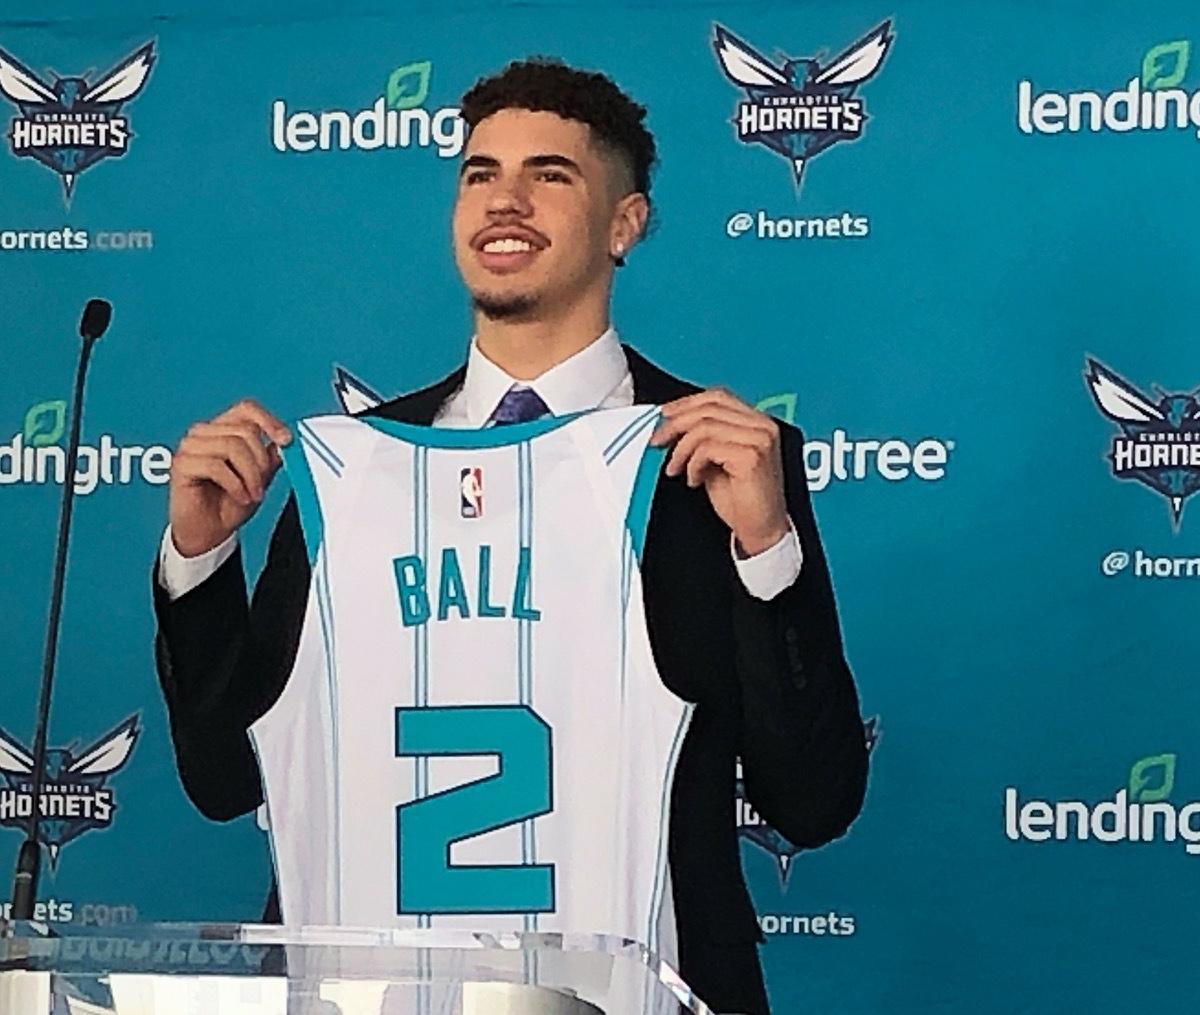 LaVar Ball's two preferred draft destinations for LaMelo are